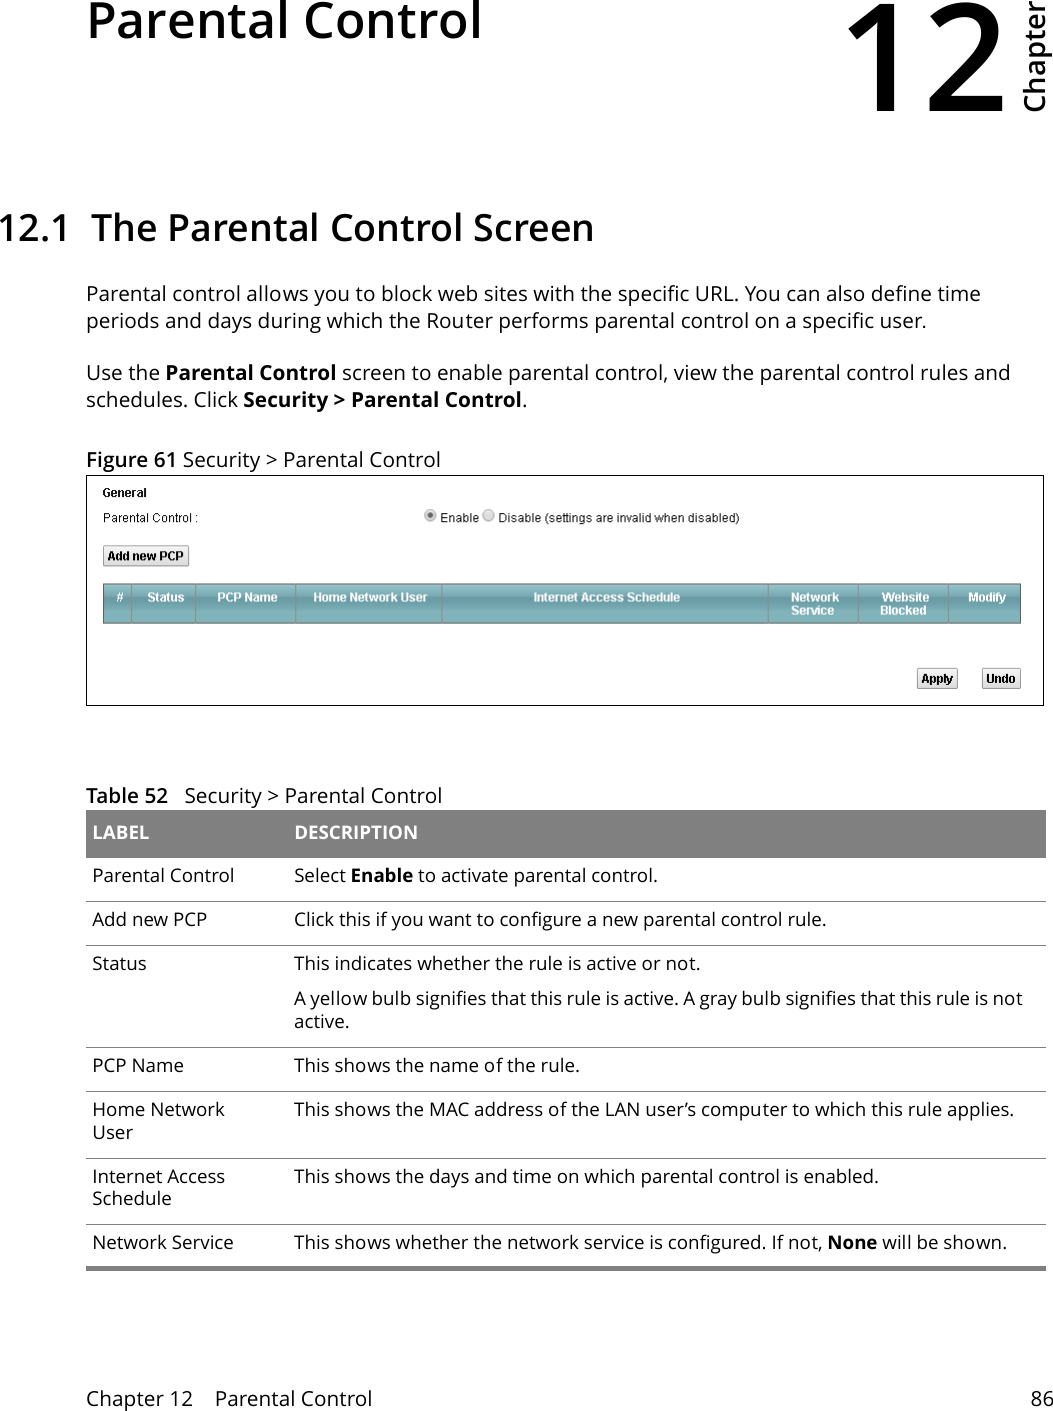 12Chapter Chapter 12    Parental Control 86CHAPTER 12 Chapter 12 Parental Control12.1  The Parental Control ScreenParental control allows you to block web sites with the specific URL. You can also define time periods and days during which the Router performs parental control on a specific user. Use the Parental Control screen to enable parental control, view the parental control rules and schedules. Click Security &gt; Parental Control. Figure 61 Security &gt; Parental Control  Table 52   Security &gt; Parental Control LABEL DESCRIPTIONParental Control Select Enable to activate parental control.Add new PCP Click this if you want to configure a new parental control rule.Status This indicates whether the rule is active or not.A yellow bulb signifies that this rule is active. A gray bulb signifies that this rule is not active.PCP Name This shows the name of the rule.Home Network User This shows the MAC address of the LAN user’s computer to which this rule applies.Internet Access ScheduleThis shows the days and time on which parental control is enabled.Network Service This shows whether the network service is configured. If not, None will be shown.